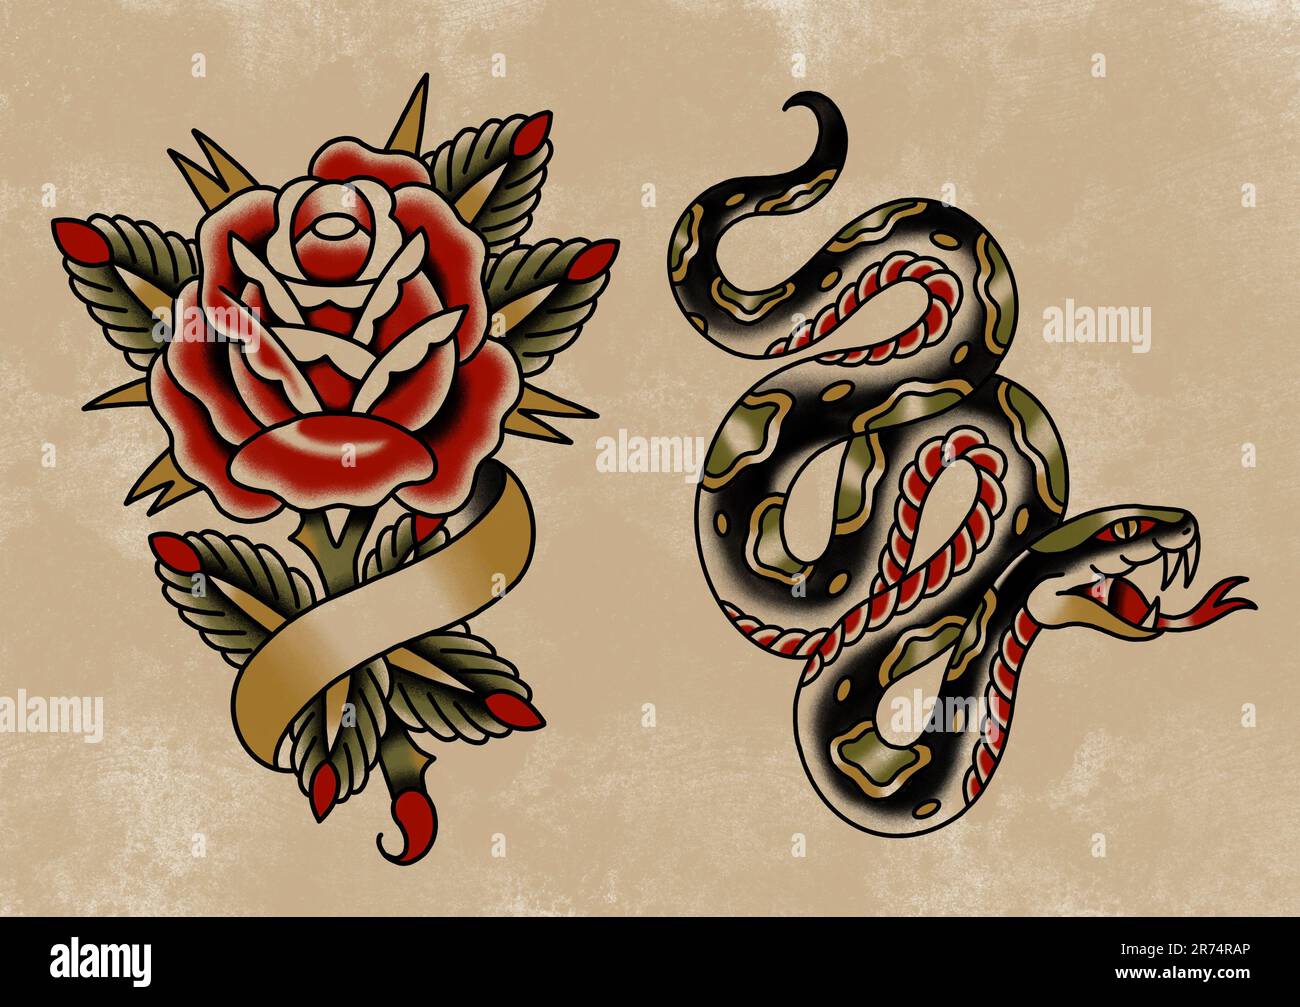 Old school traditional tattoo flash sheet drawings snake and rose with paper scroll on old paper background Stock Photo